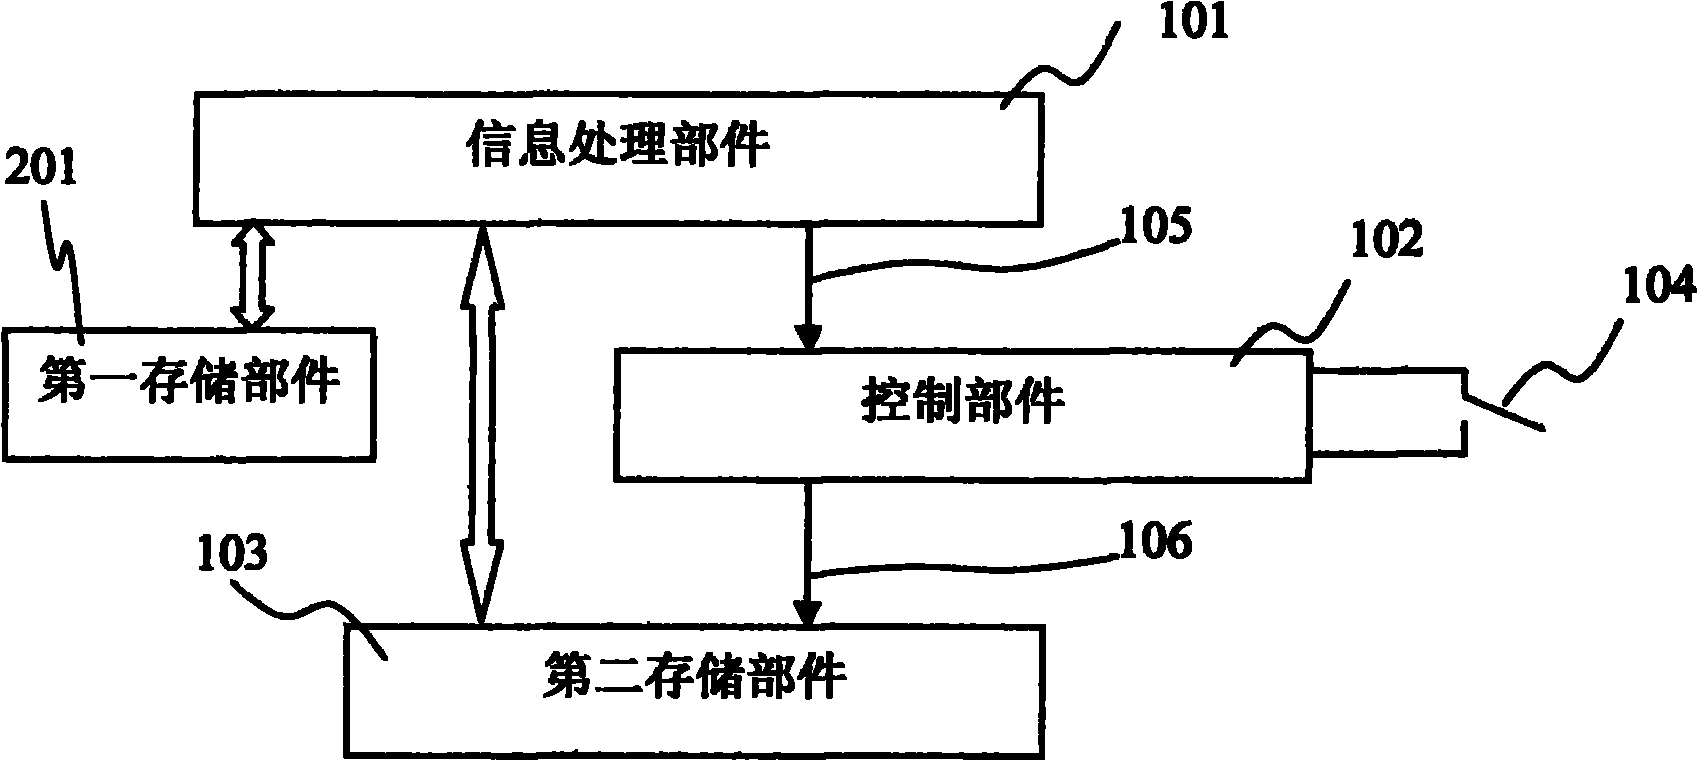 Software running method of high-safety information system